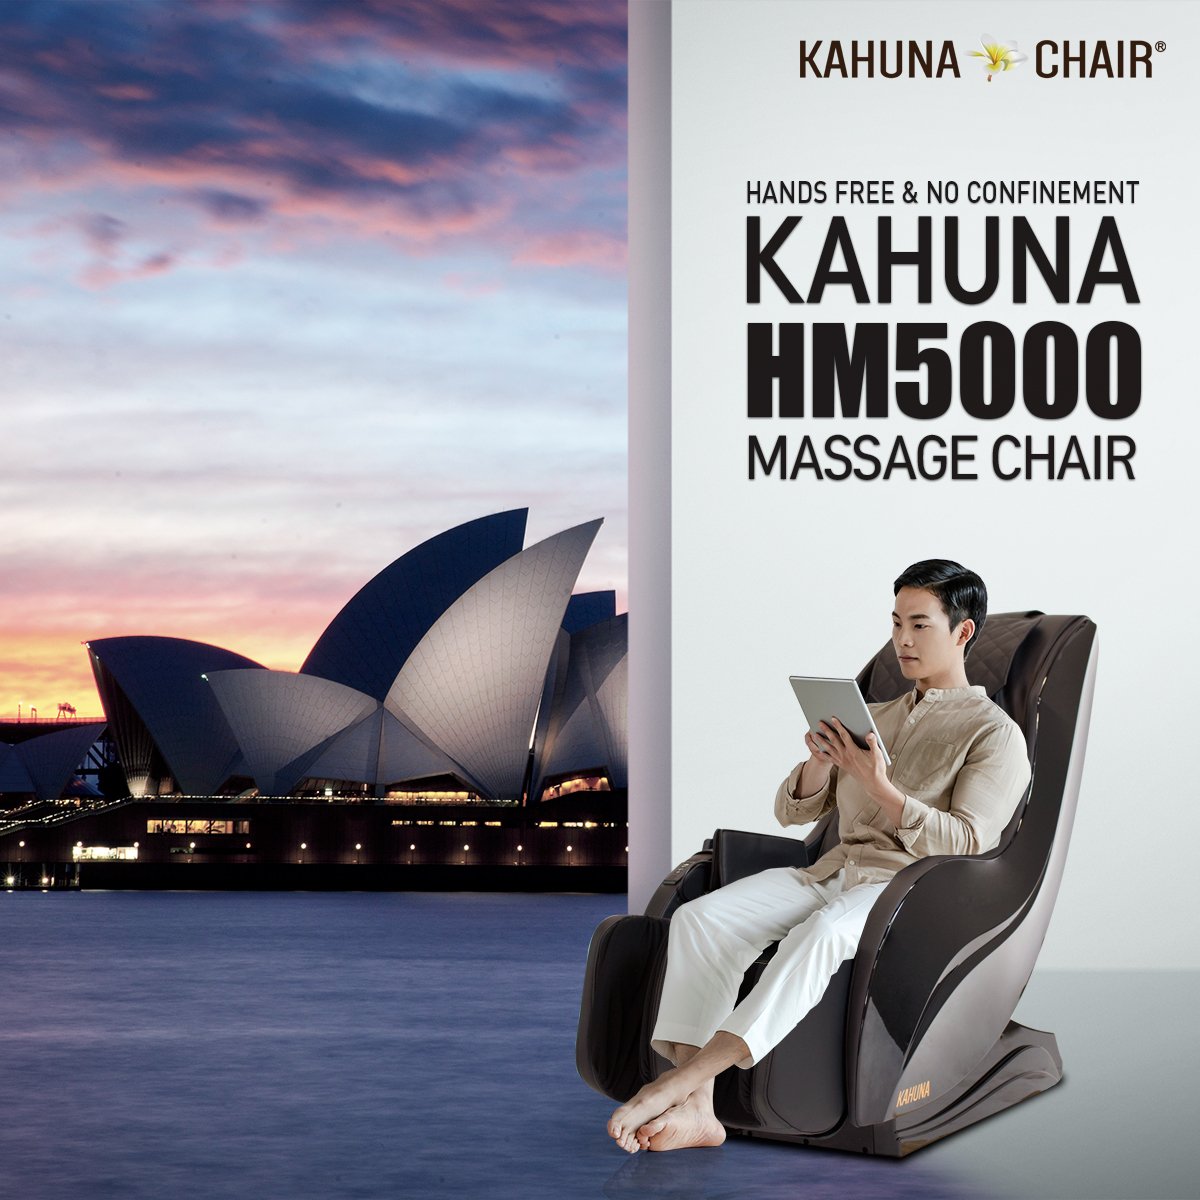 Kahuna Limitless Slender Hand Free and No Confinement Massage Chair